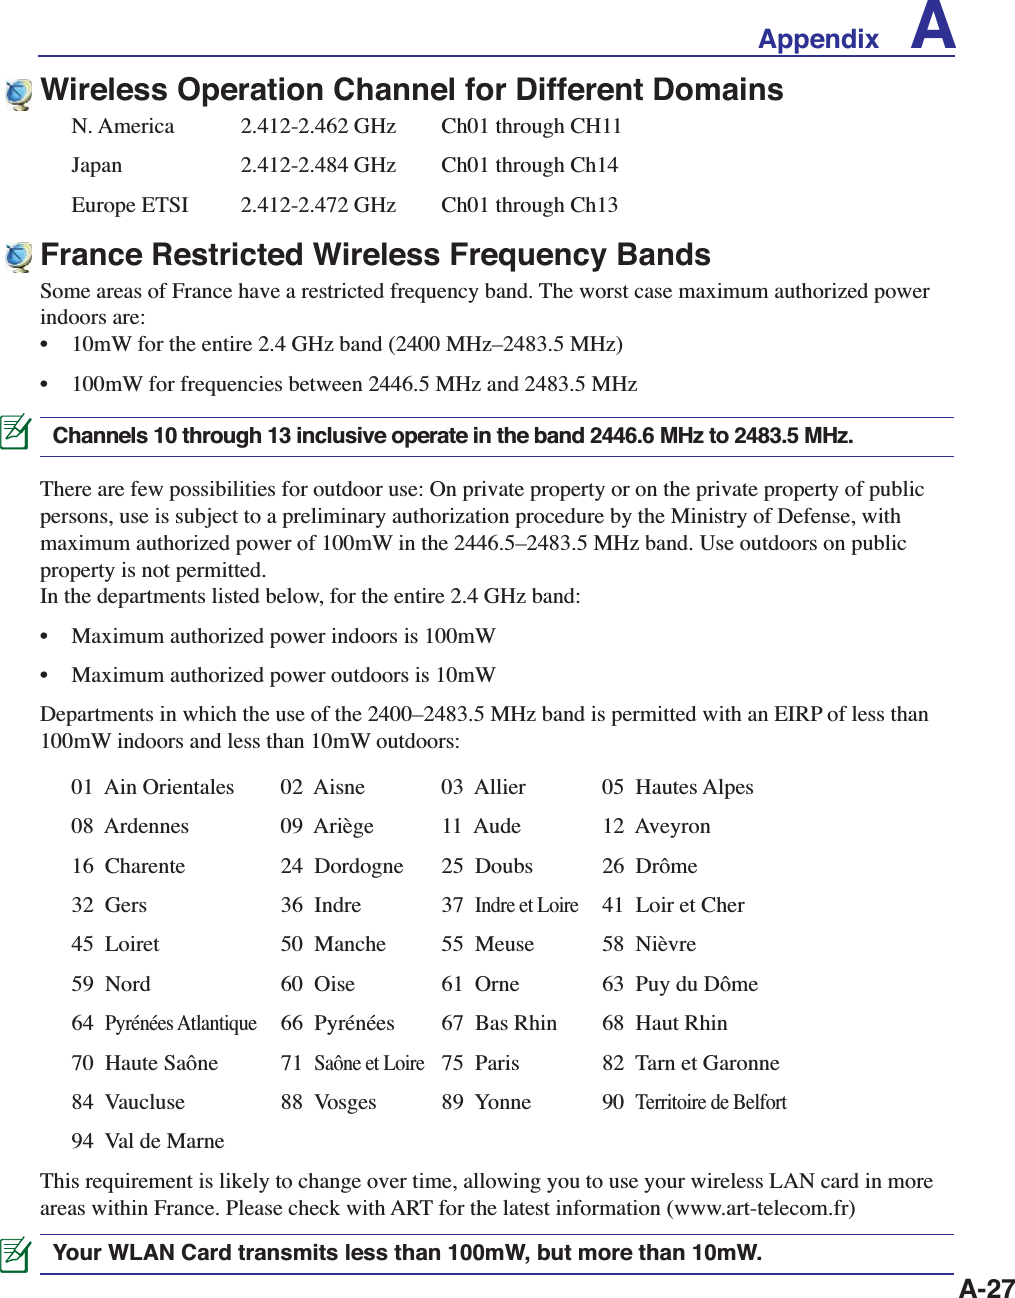 A-27France Restricted Wireless Frequency BandsSome areas of France have a restricted frequency band. The worst case maximum authorized power indoors are: •  10mW for the entire 2.4 GHz band (2400 MHz–2483.5 MHz) •  100mW for frequencies between 2446.5 MHz and 2483.5 MHzChannels 10 through 13 inclusive operate in the band 2446.6 MHz to 2483.5 MHz.There are few possibilities for outdoor use: On private property or on the private property of public persons, use is subject to a preliminary authorization procedure by the Ministry of Defense, with maximum authorized power of 100mW in the 2446.5–2483.5 MHz band. Use outdoors on public property is not permitted. In the departments listed below, for the entire 2.4 GHz band: •  Maximum authorized power indoors is 100mW •  Maximum authorized power outdoors is 10mW Departments in which the use of the 2400–2483.5 MHz band is permitted with an EIRP of less than 100mW indoors and less than 10mW outdoors:01  Ain Orientales   02  Aisne    03  Allier  05  Hautes Alpes08  Ardennes      09  Ariège    11  Aude   12  Aveyron 16  Charente      24  Dordogne  25  Doubs  26  Drôme 32  Gers      36  Indre    37  Indre et Loire  41  Loir et Cher45  Loiret      50  Manche    55  Meuse  58  Nièvre 59  Nord      60  Oise     61  Orne   63  Puy du Dôme 64  Pyrénées Atlantique  66  Pyrénées   67  Bas Rhin  68  Haut Rhin 70  Haute Saône    71  Saône et Loire  75  Paris   82  Tarn et Garonne84  Vaucluse      88  Vosges    89  Yonne  90  Territoire de Belfort94  Val de MarneThis requirement is likely to change over time, allowing you to use your wireless LAN card in more areas within France. Please check with ART for the latest information (www.art-telecom.fr) Your WLAN Card transmits less than 100mW, but more than 10mW.Wireless Operation Channel for Different DomainsN. America    2.412-2.462 GHz   Ch01 through CH11Japan    2.412-2.484 GHz   Ch01 through Ch14Europe ETSI    2.412-2.472 GHz   Ch01 through Ch13Appendix    A